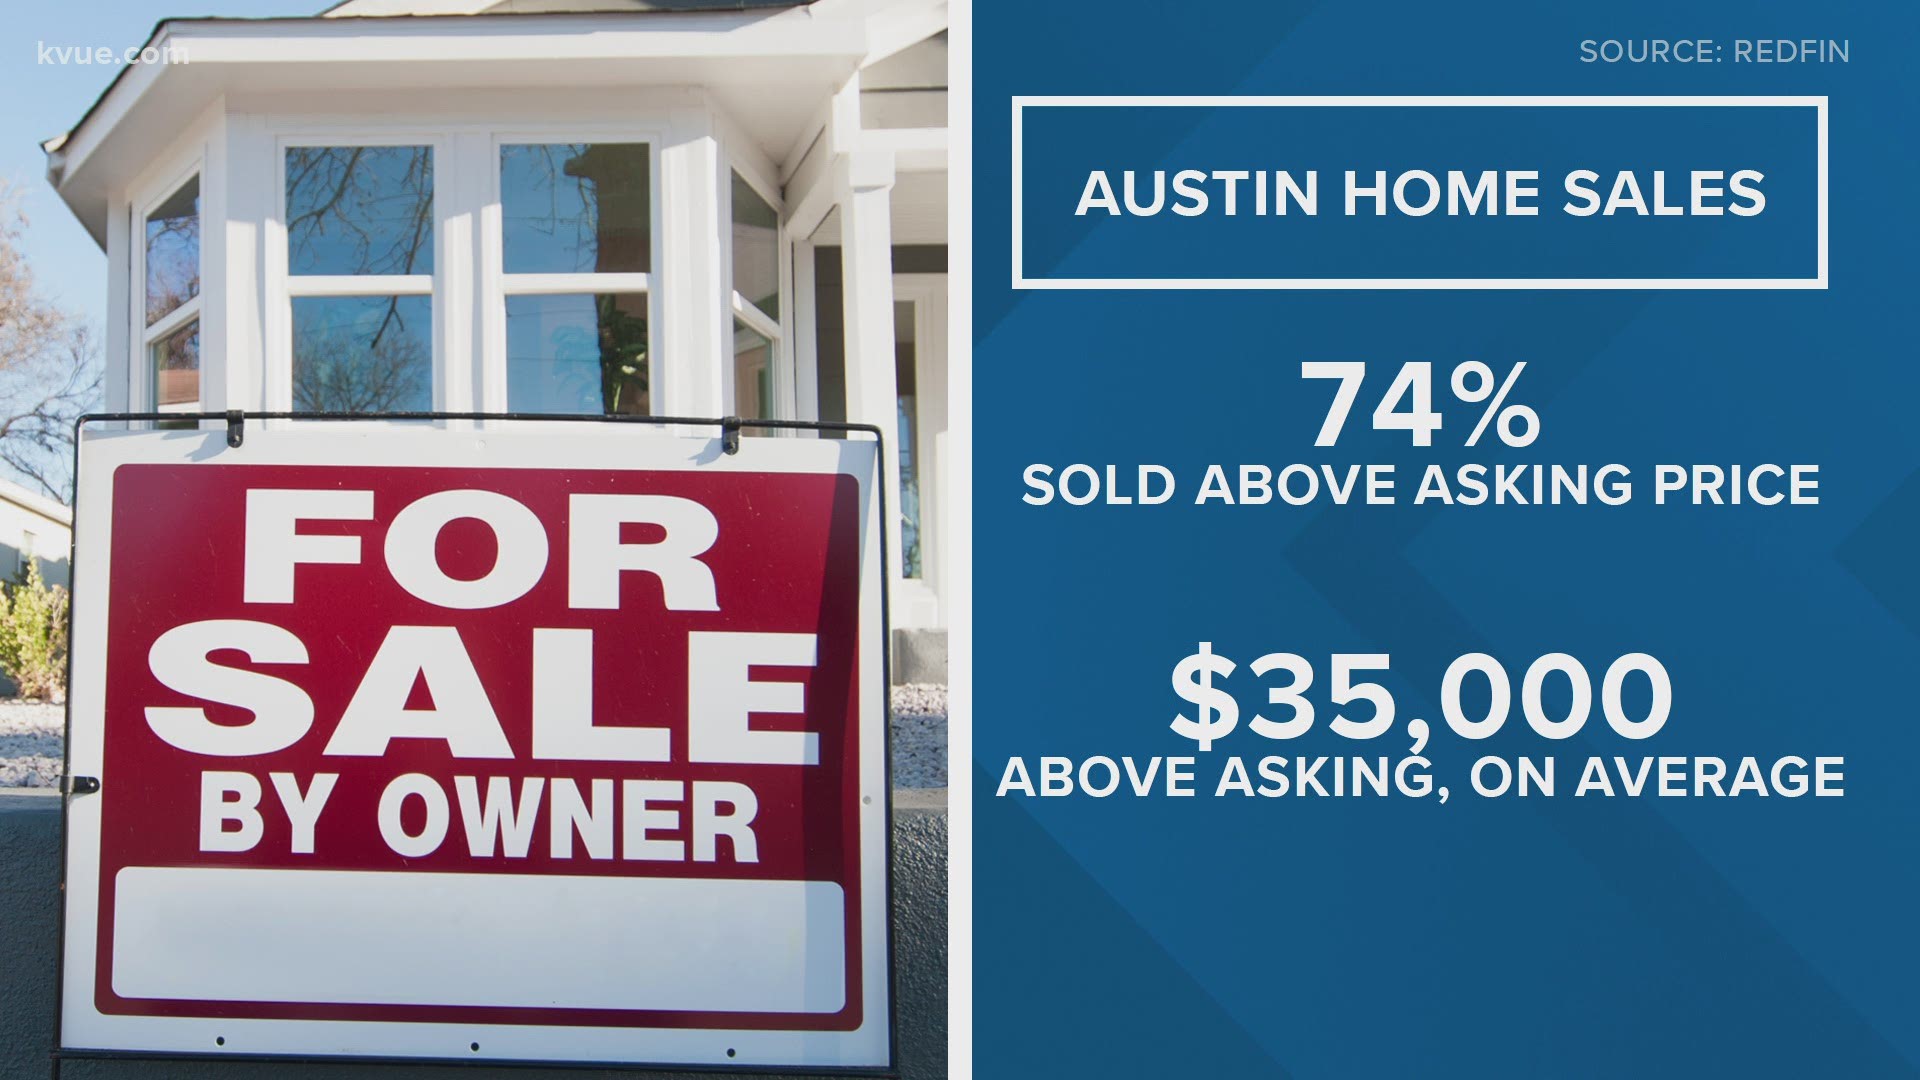 According to a report, 1,500 Austin homes sold for more than $100K above asking price so far this year.